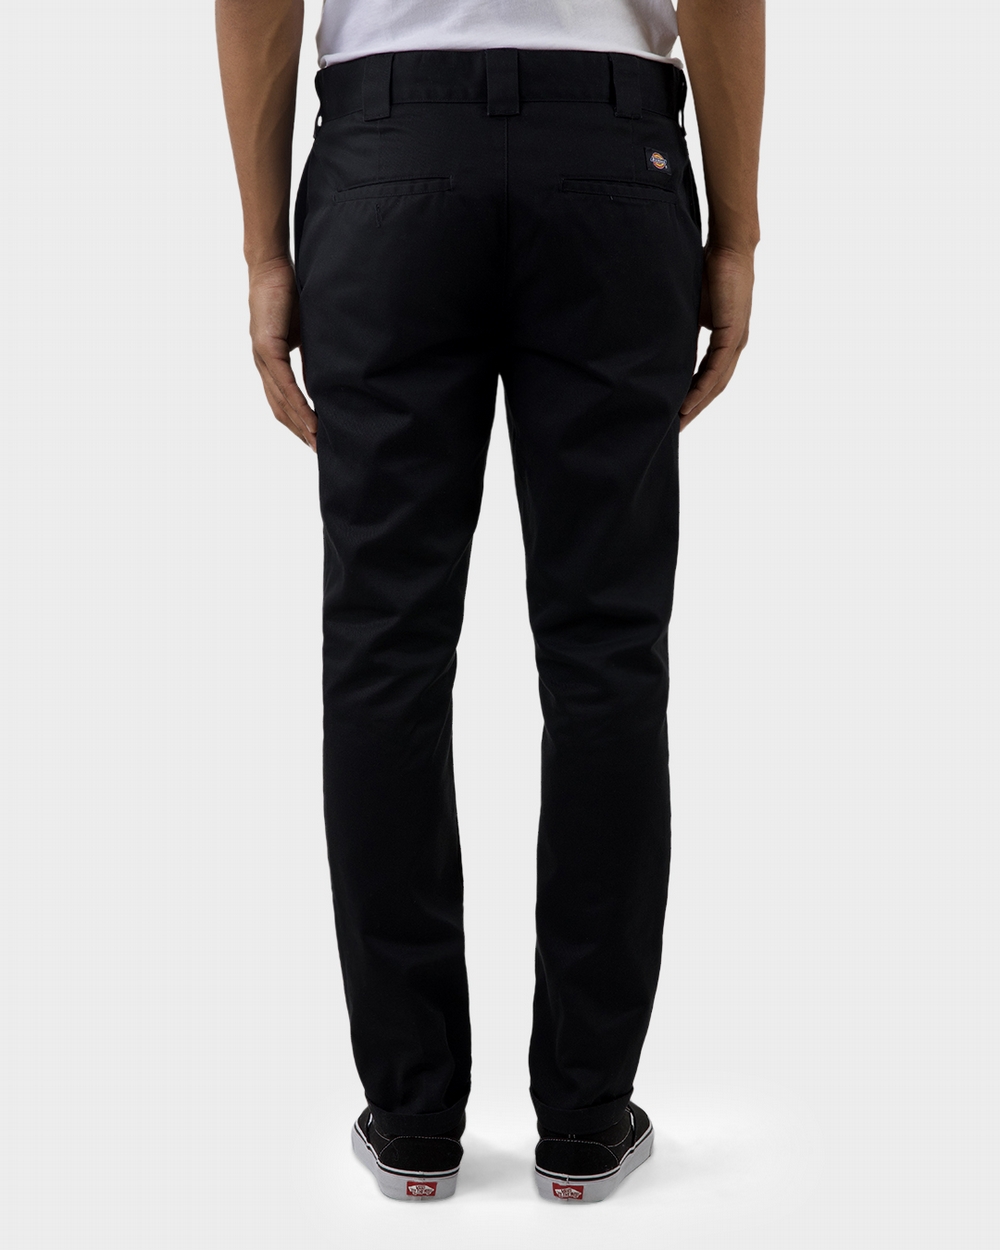 US POLO ASSN Men Textured Slim Tapered Fit Casual Trousers  Lifestyle  Stores  Phase 1  Chandigarh